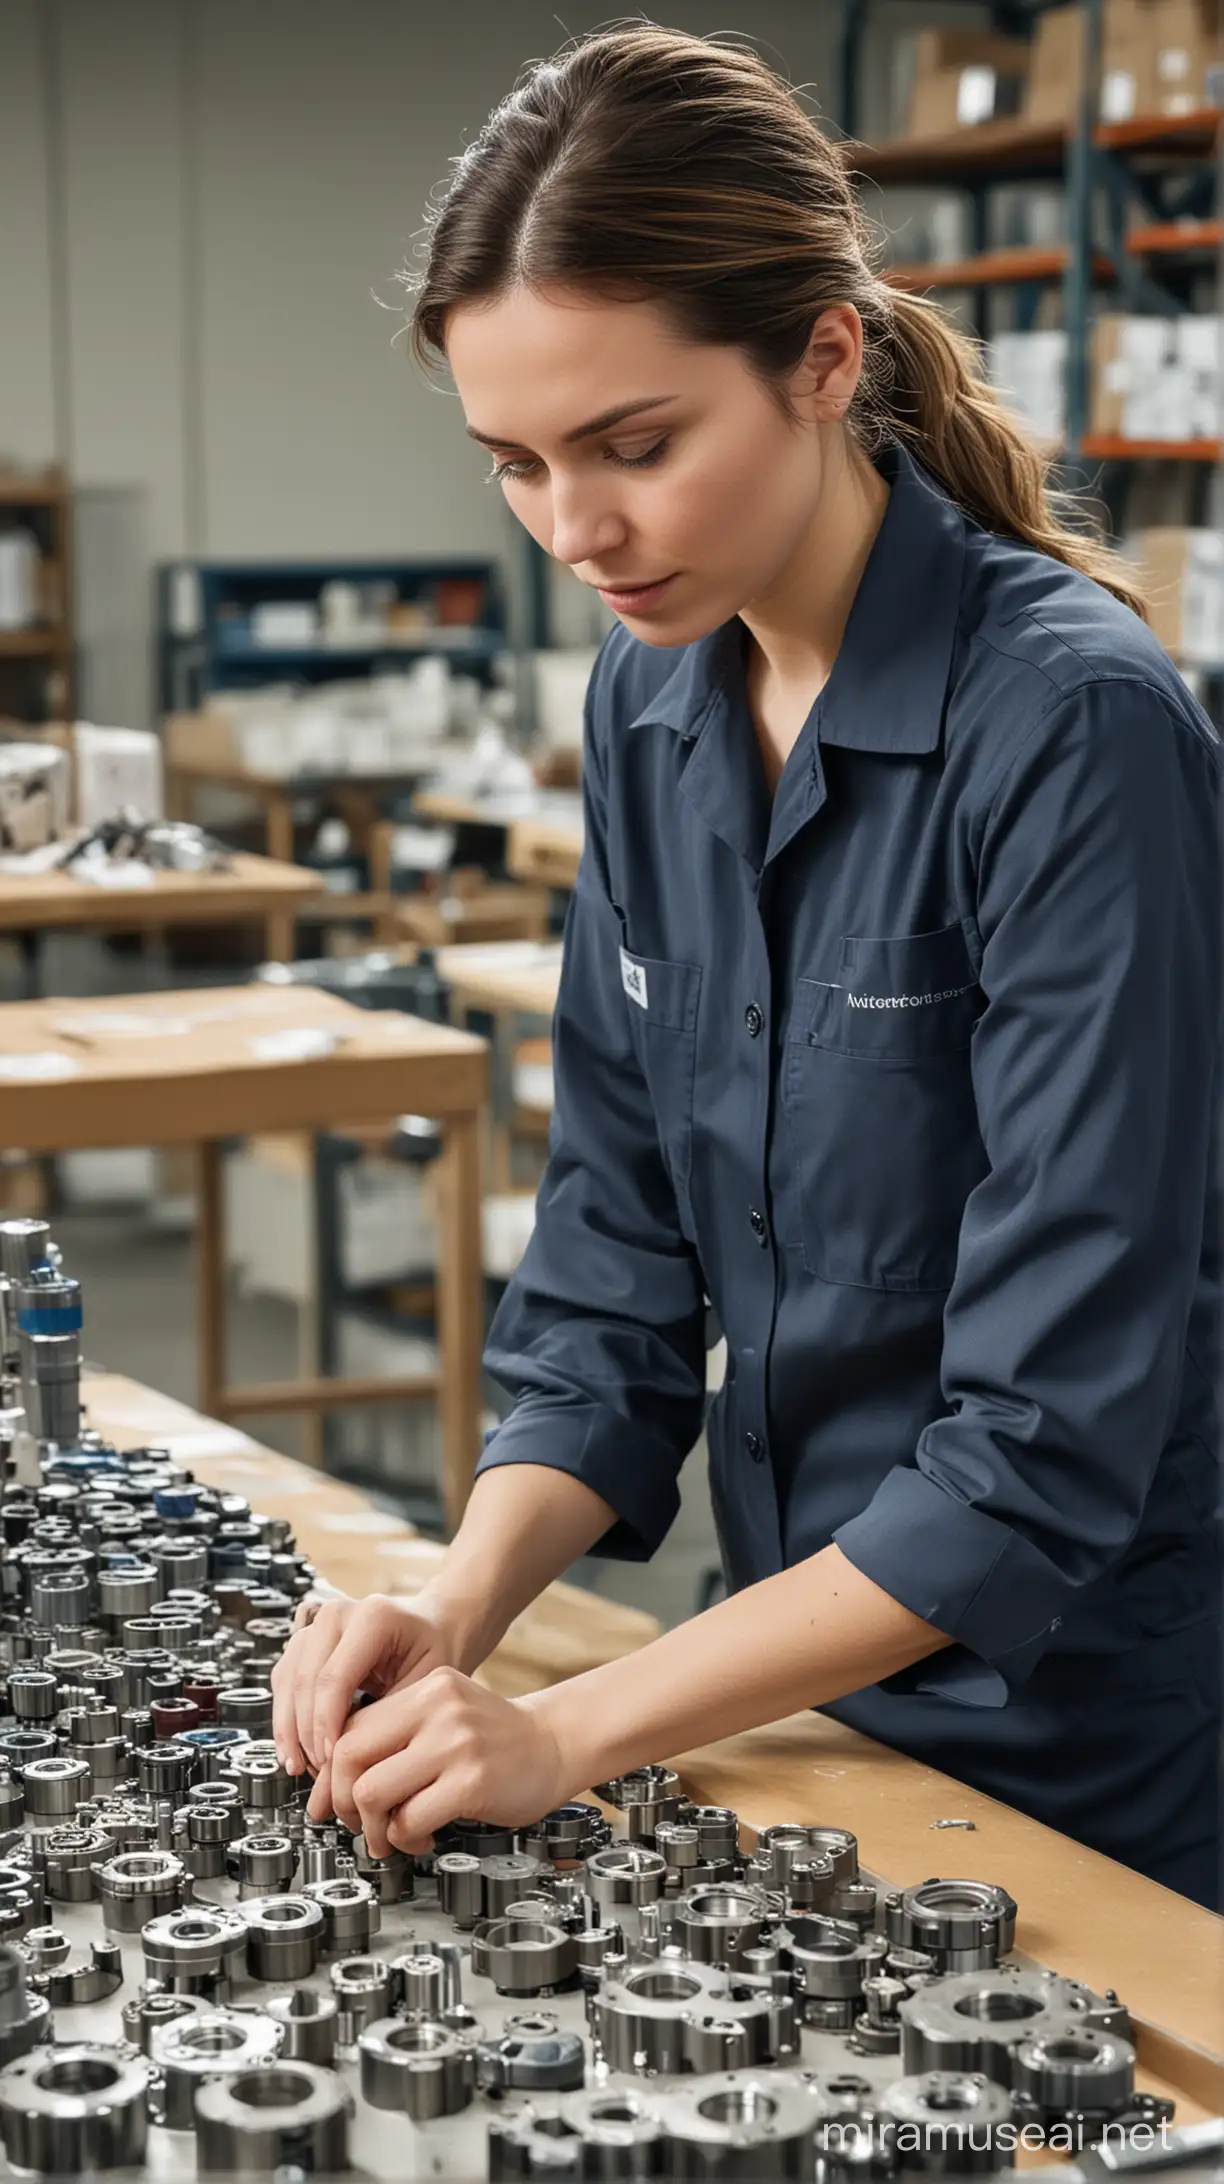 Meticulous Female Employee Inspecting and Packaging Spare Parts at Voyapa